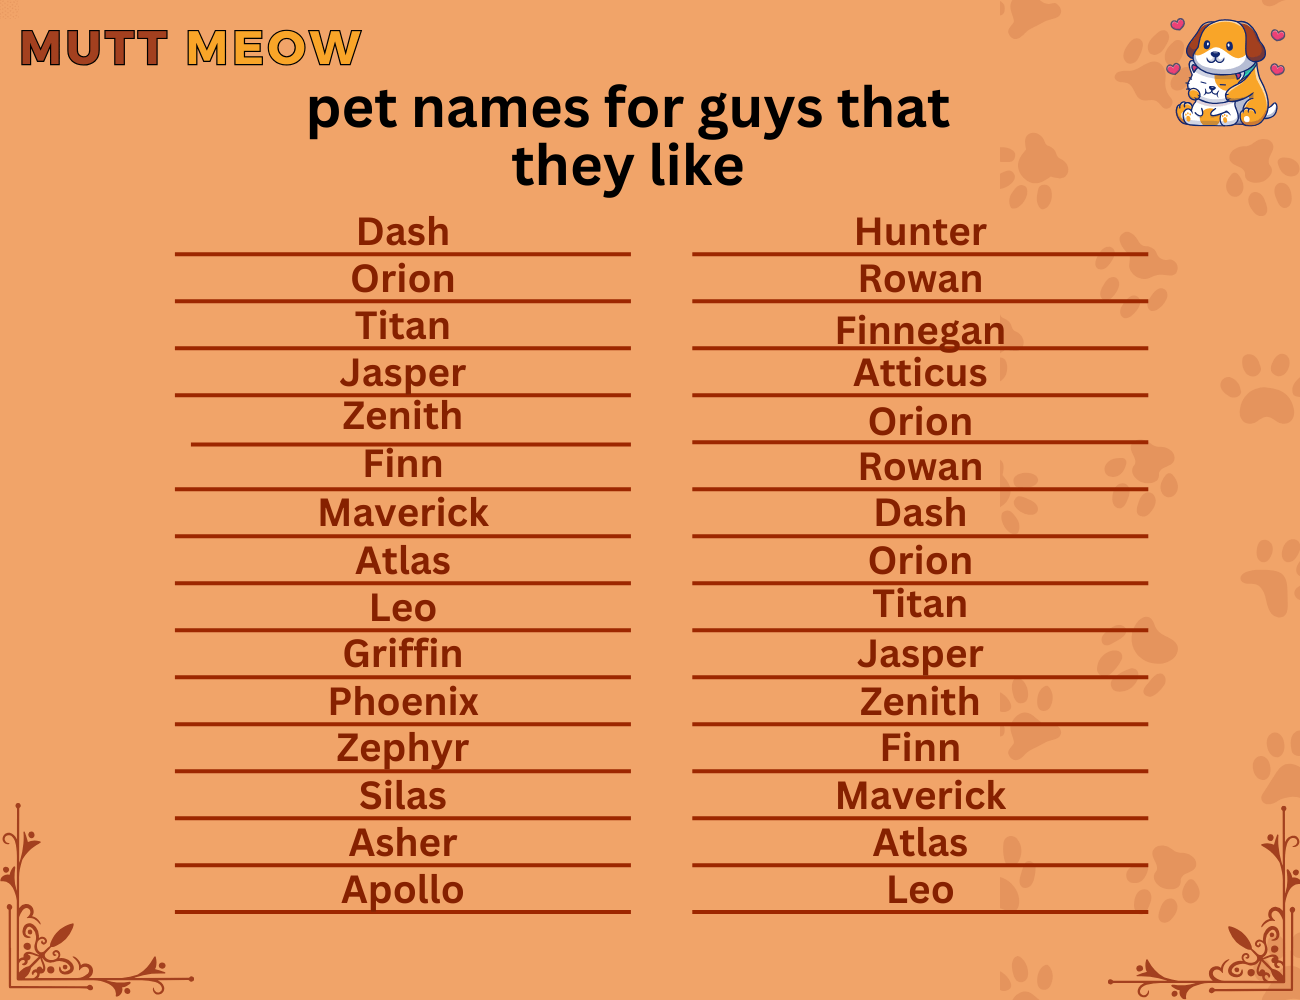 Bulk 1 Pet Names For Guys That They Like 1 